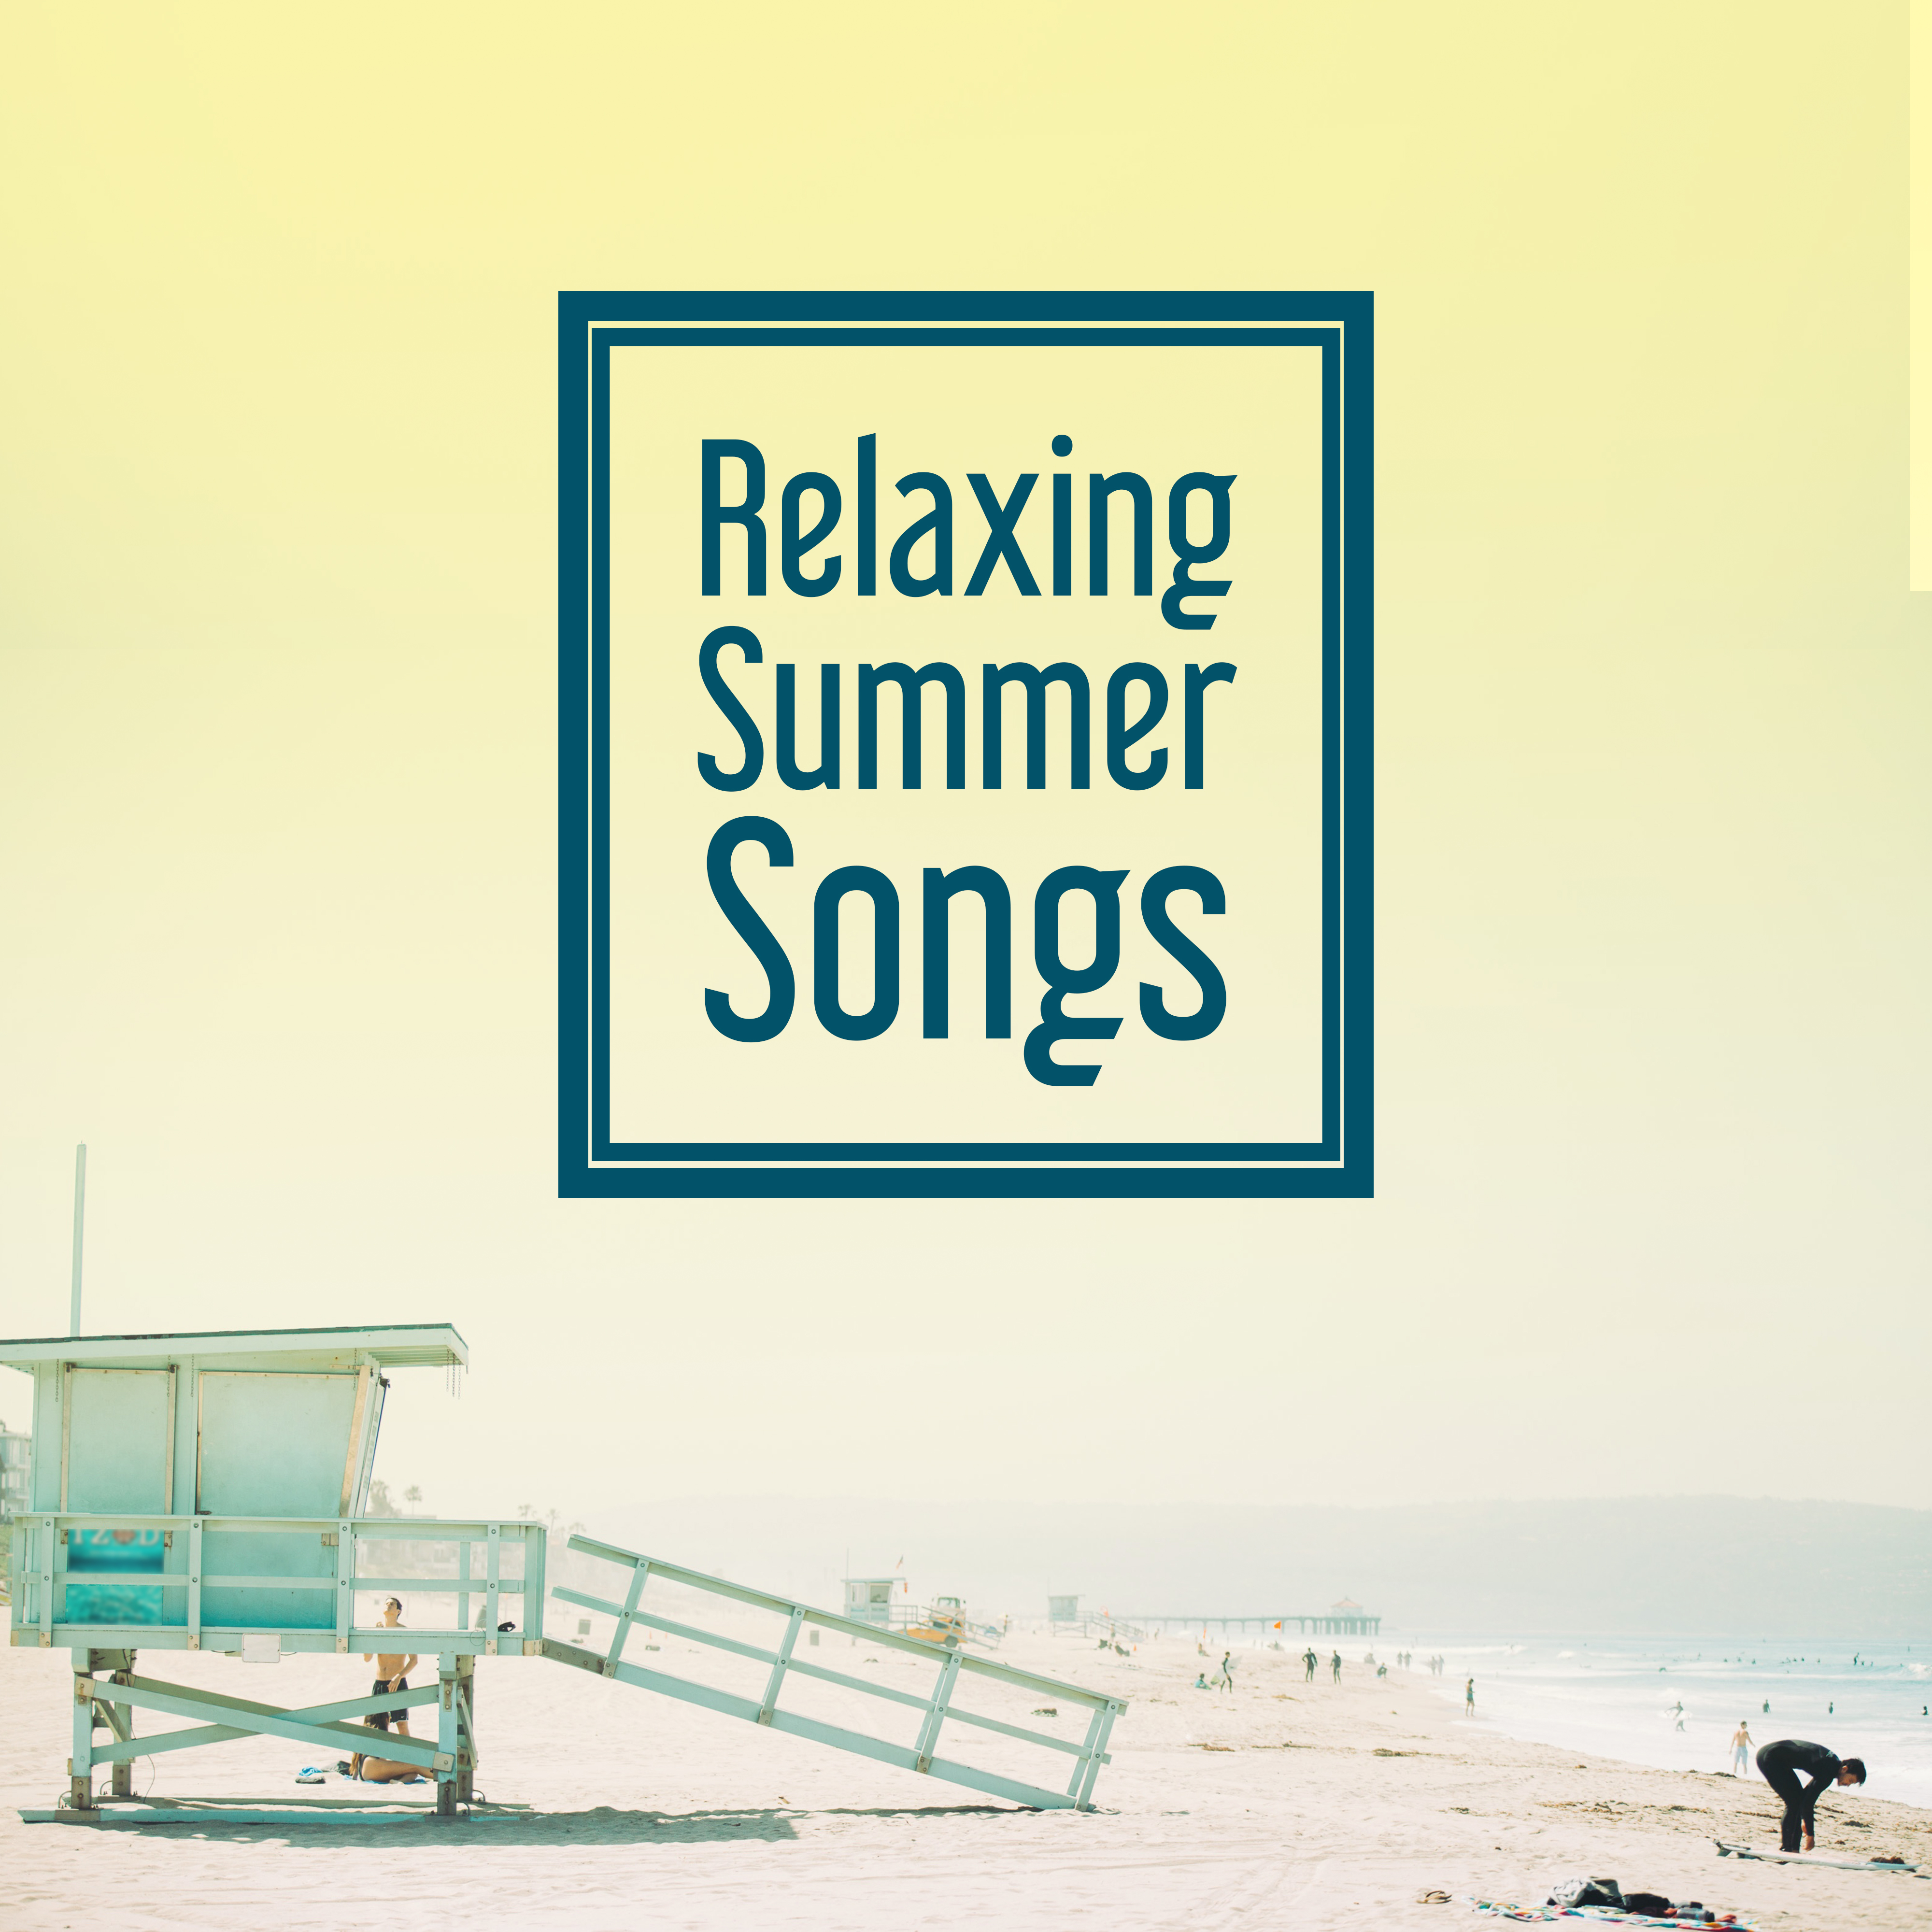 Relaxing Summer Songs  Chilled Music, Hot Beach Lounge, Sounds to Rest, Holiday Chill Out